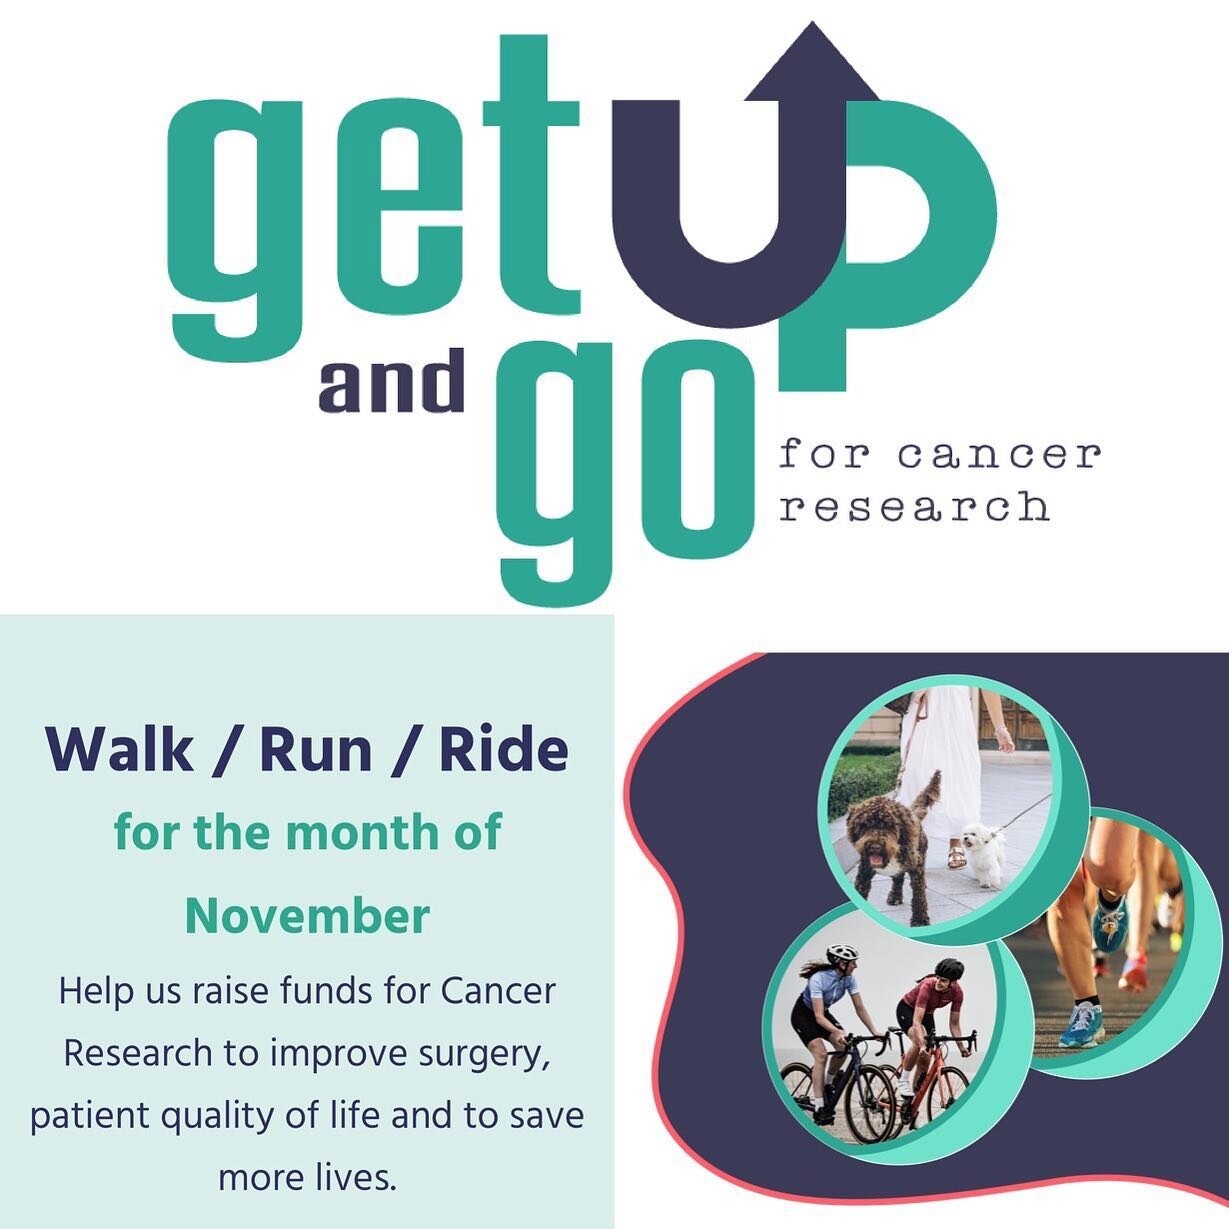 Get Up &amp; Go for Cancer Research 
🚶🏻&zwj;♀️Walk/🏃🏼&zwj;♂️Run/🚴🏾&zwj;♂️Bike for the month of November to support hepatobiliary and upper gastrointestinal cancer research. Grab your friends and family and come join us in getting fit while supp